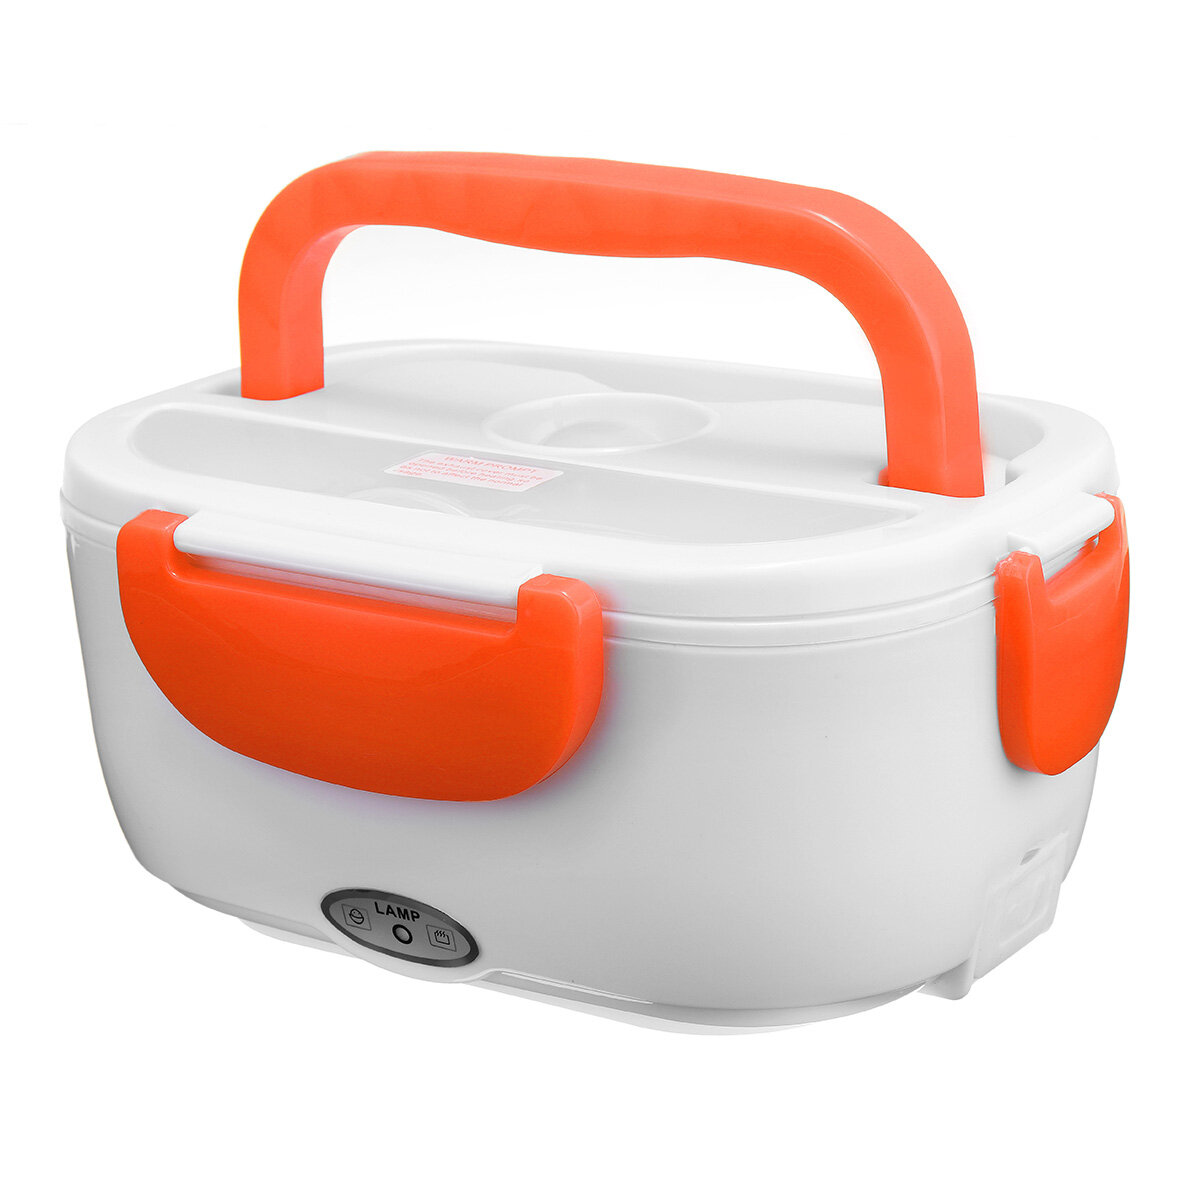 1.2l 110v/220v Portable Electric Heating Lunch Box Bento Storage Box Office For School Traveling